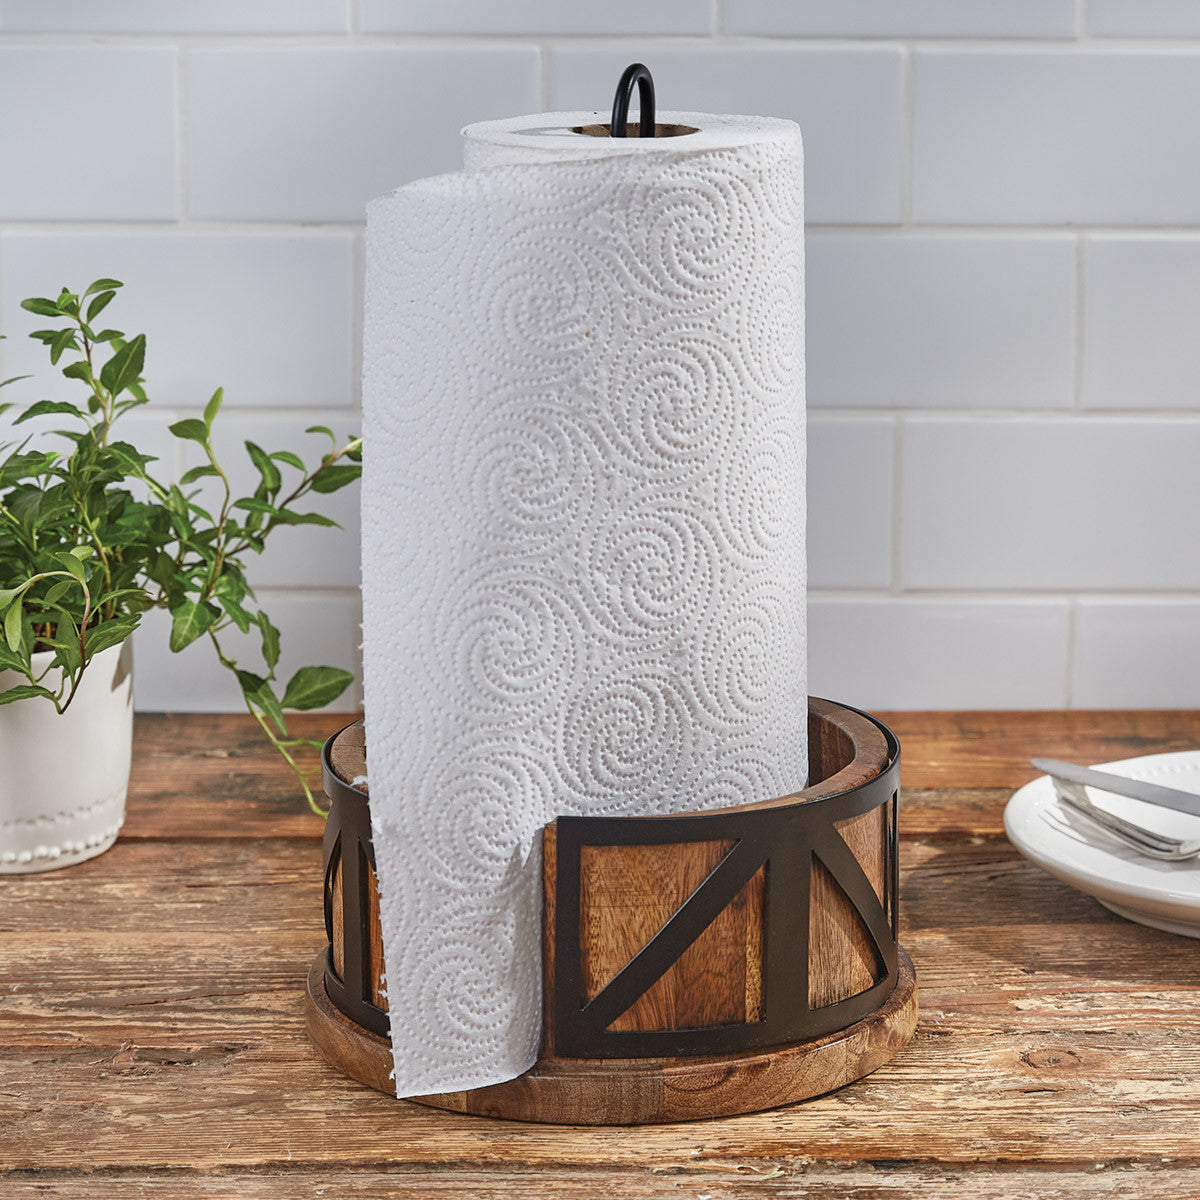 MINLUFUL Vintage Paper Towel Holder Stand - Cast Iron Kitchen Countertop  Decor Roll Paper Towel Holder Dispenser, Easy Tear Paper Towel Holder, Red